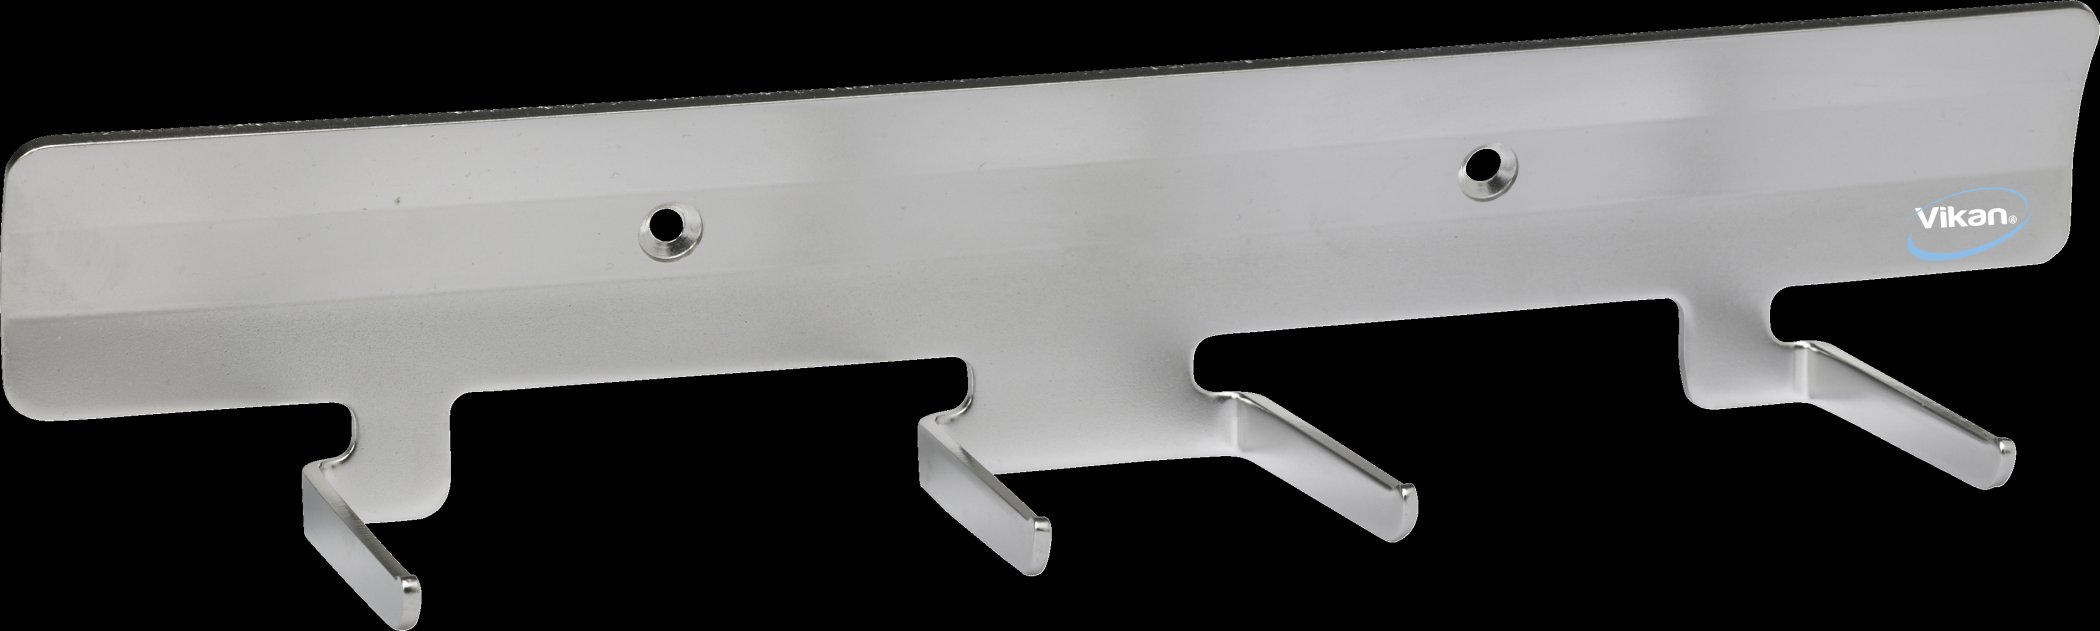 Vikan Stainless Steel Wall Bracket to hold 1-4 Products